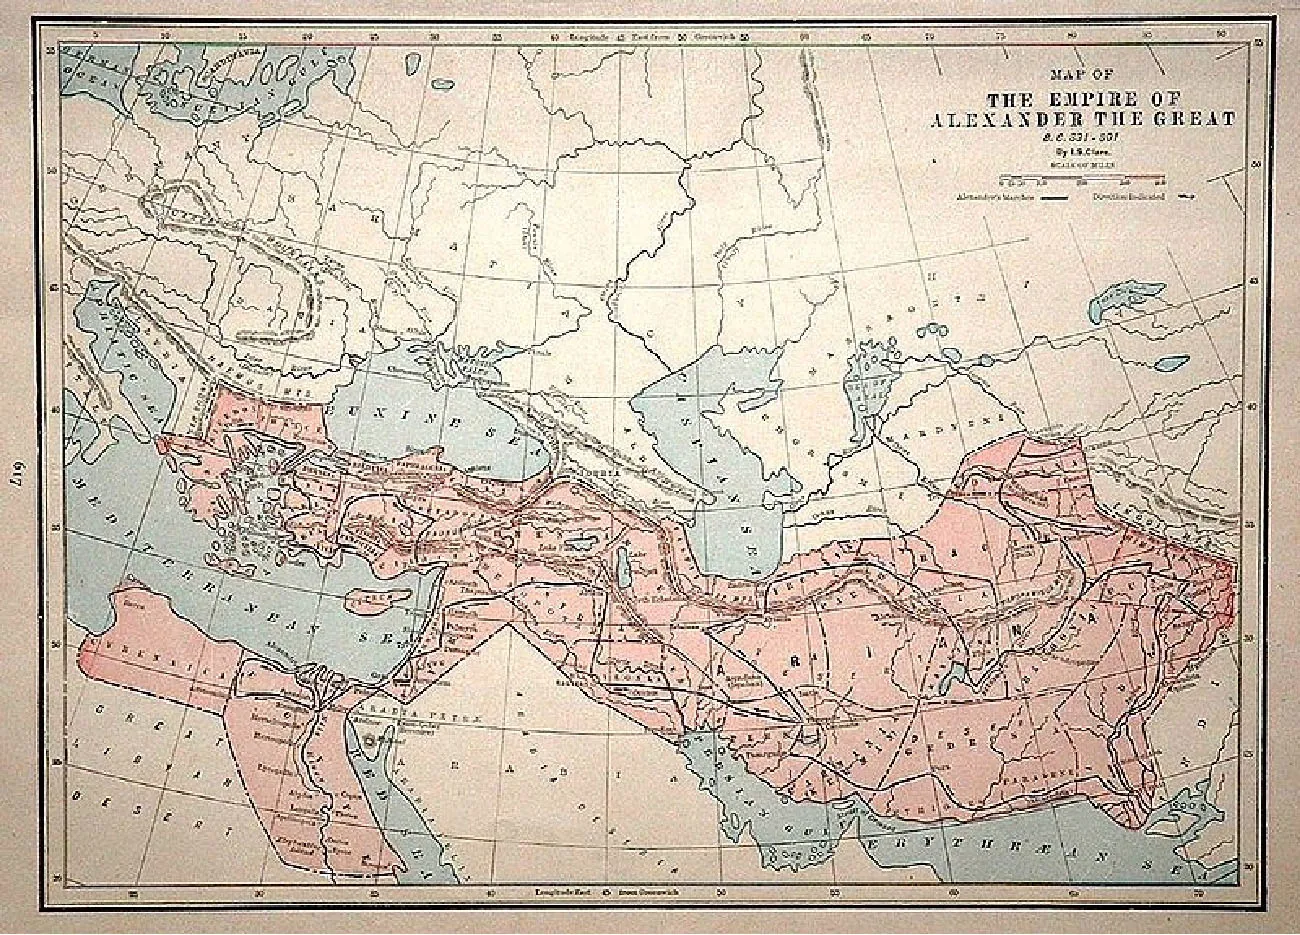 A map is shown labelled “Map of The Empire of Alexander the Great” in the top right corner. A scale is shown below the title. The map shows water in blue and land in off-white, with blue and black lines running throughout. The Adriatic Sea, the Mediterranean Sea, and the Euxine Sea are labelled in the west section of the map, The Red Sea is labelled in the southwest and the Persian Gulf and the Erythræan Sea are labelled in the southeast. The Caspian Sea is labelled in the middle of the map. An area from the Adriatic Sea in the west, heading east to the end of the map, bordered at the south by the Persian Gulf and the Erythræan Sea and to the north by the Caspian Sea, is highlighted pink. A section of land south of the Mediterranean Sea is also highlighted pink.